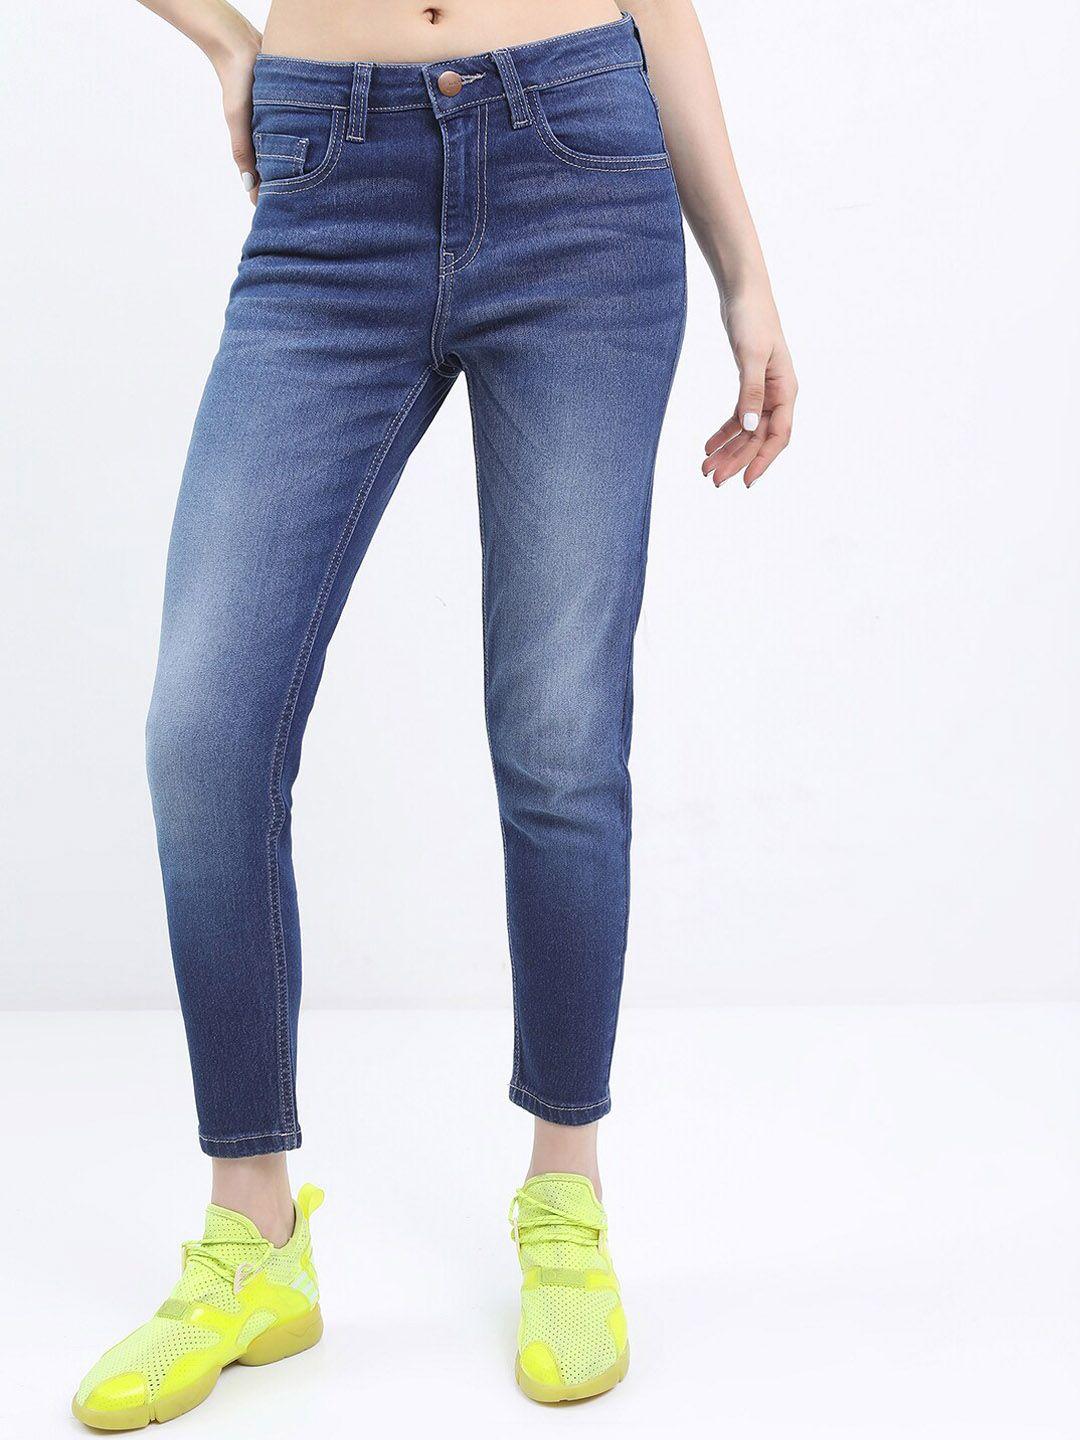 ketch-women-heavy-fade-whiskers-and-chevrons-mid-rise-skinny-fit-jeans